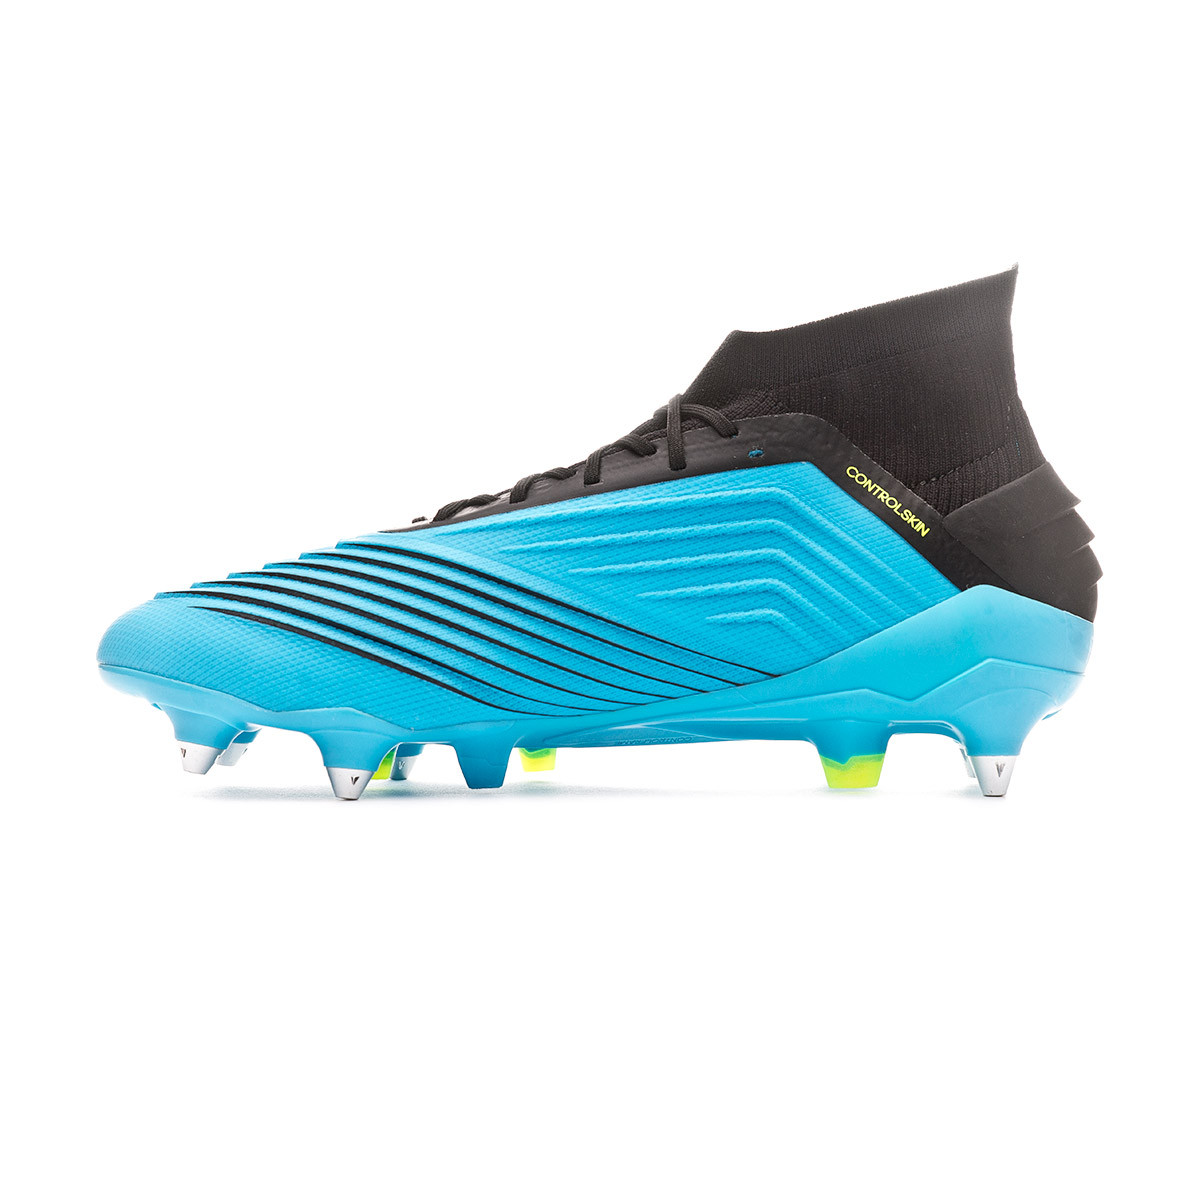 laceless football boots 219